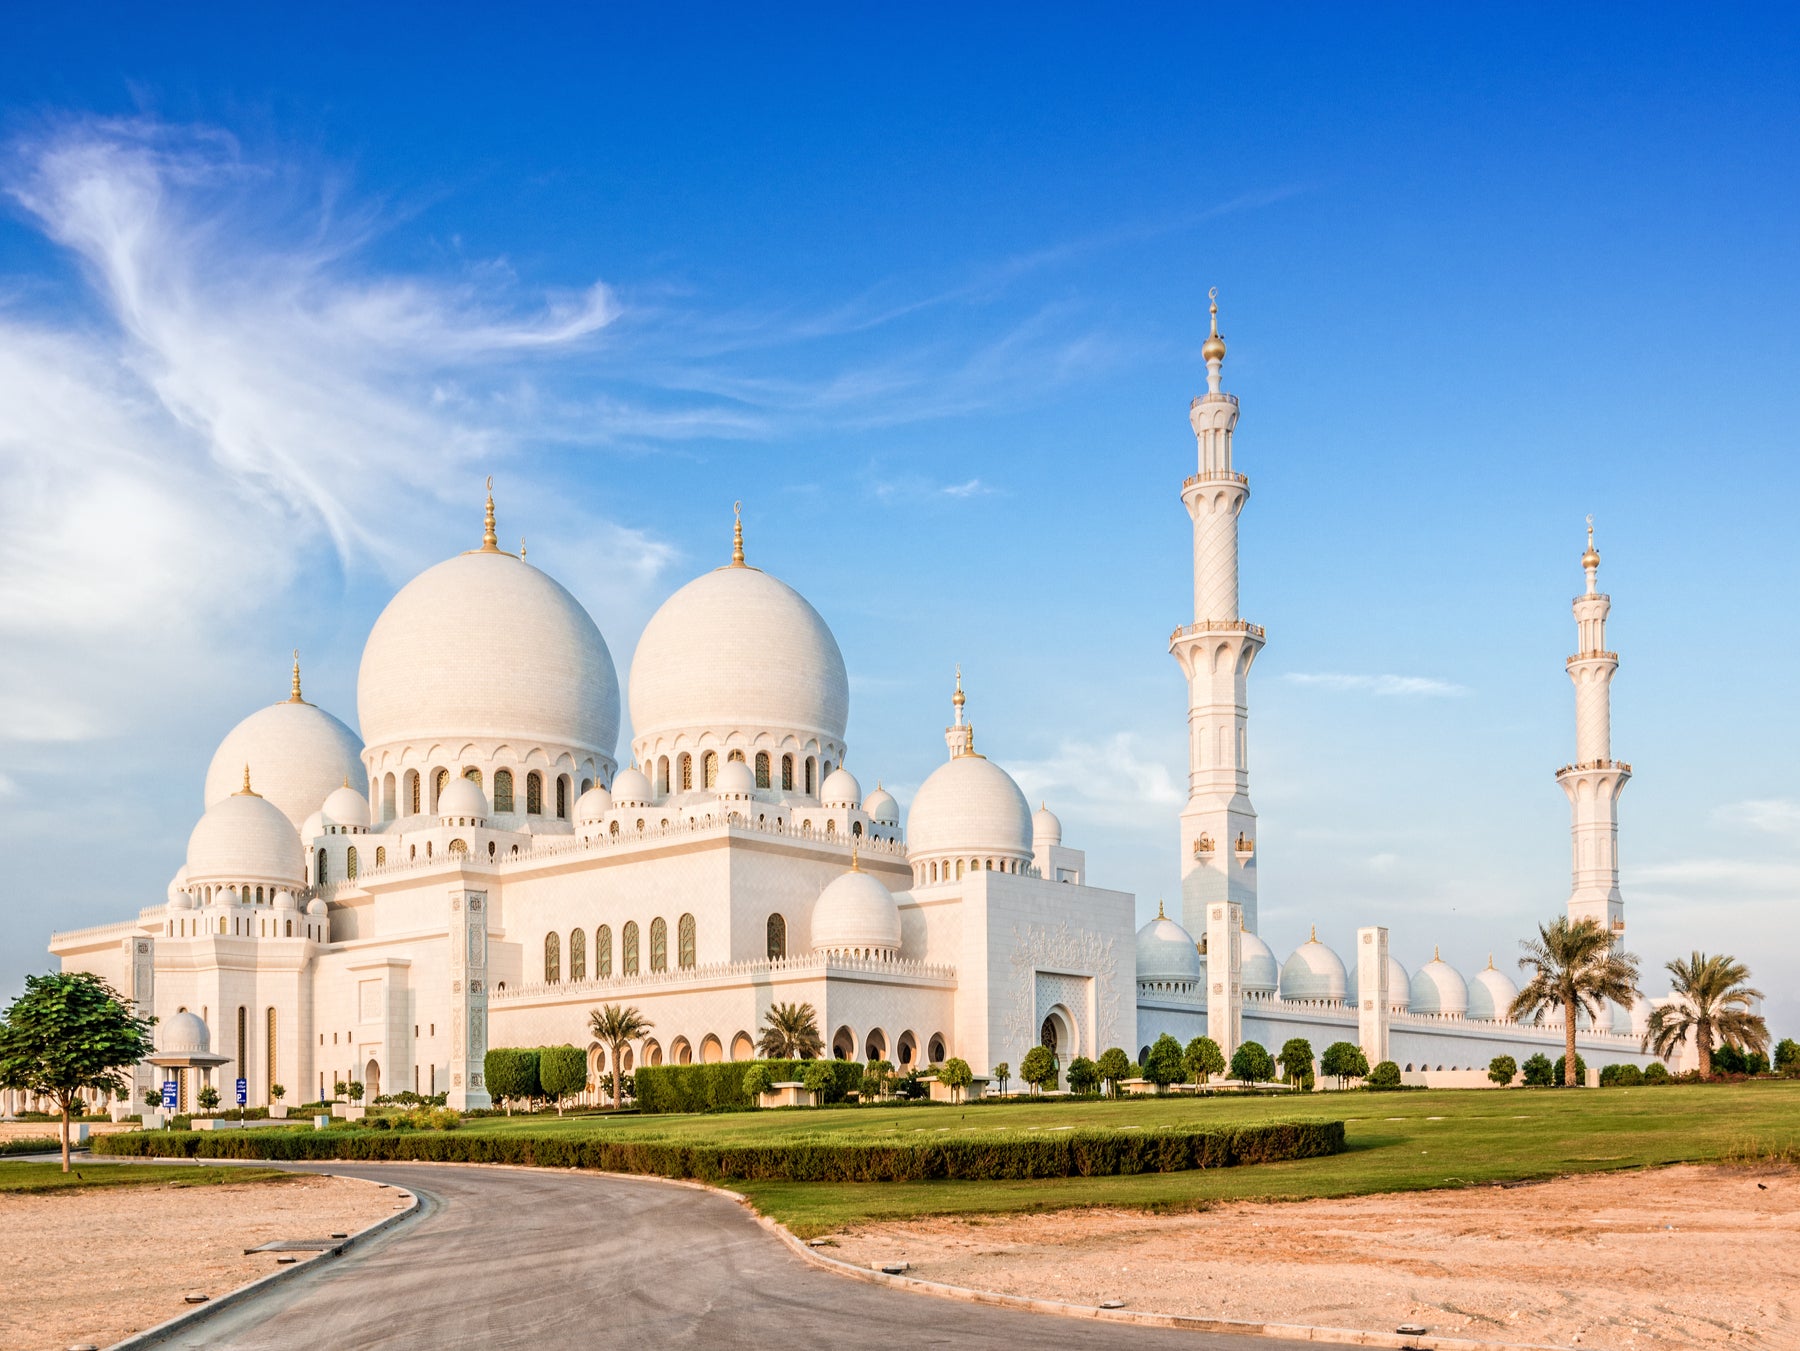 <p>Sheikh Zayed Grand Mosque, the largest mosque in Abu Dhabi, is an architecural icon </p>